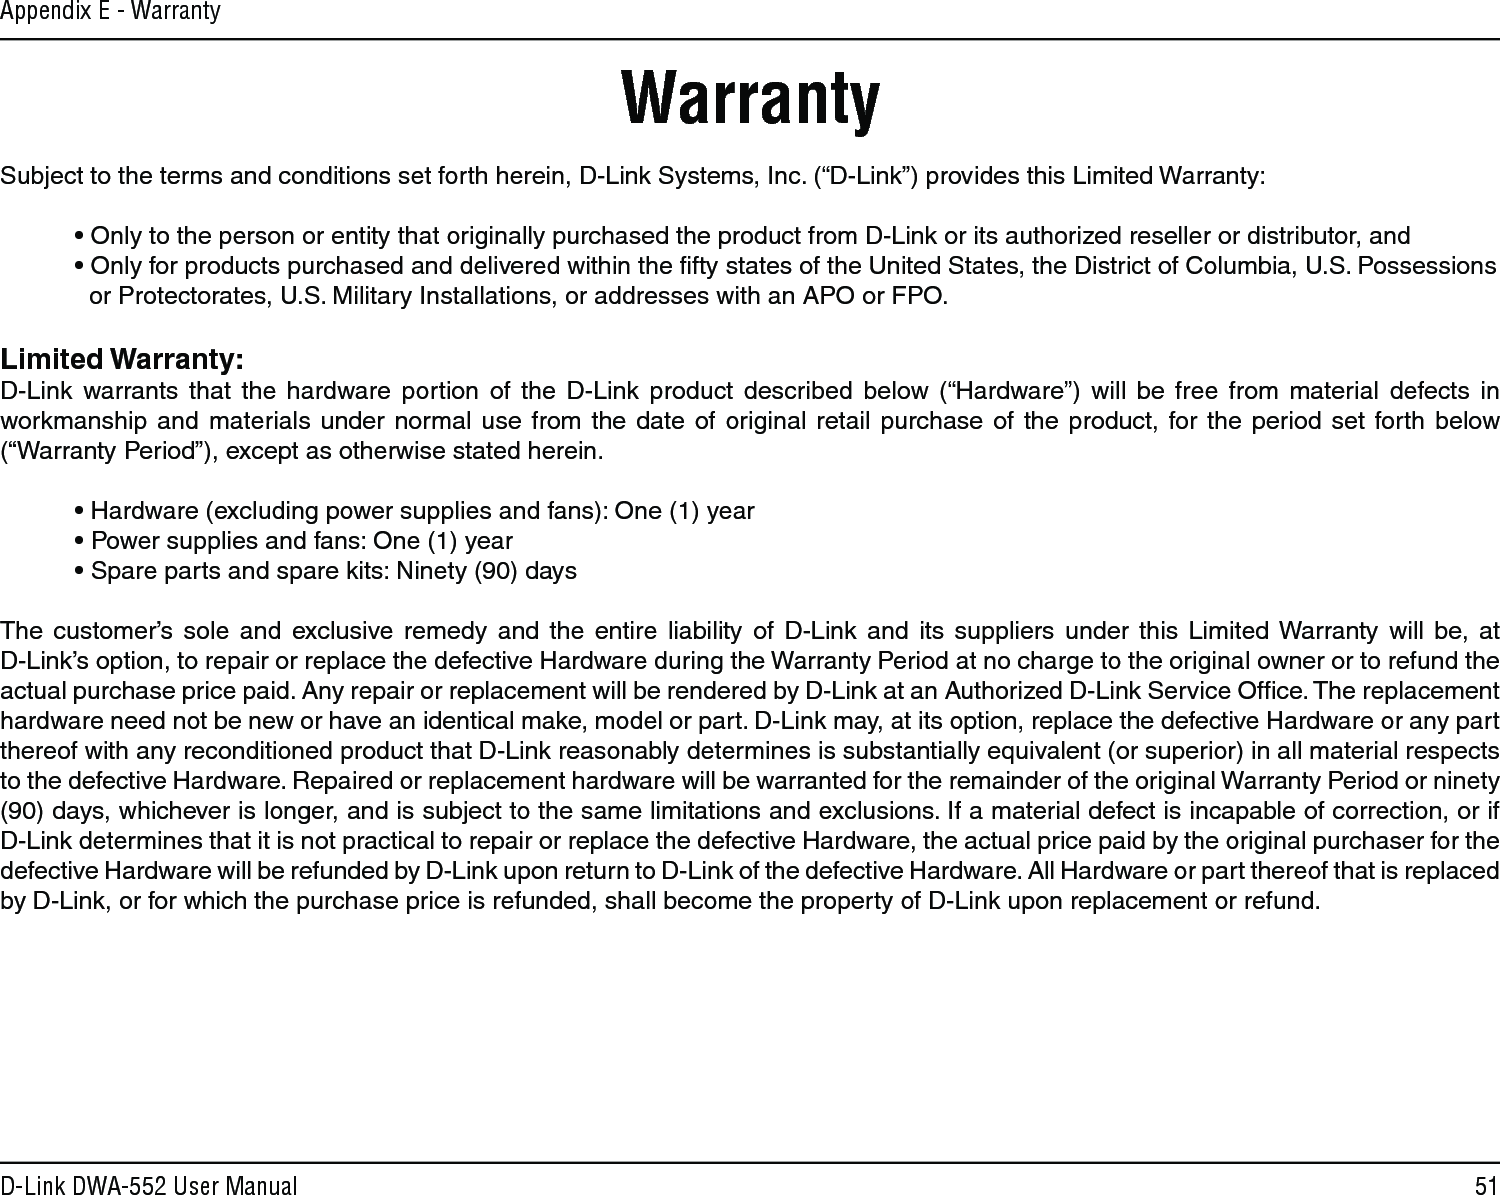 51D-Link DWA-552 User ManualAppendix E - WarrantyWarrantySubject to the terms and conditions set forth herein, D-Link Systems, Inc. (“D-Link”) provides this Limited Warranty:  • Only to the person or entity that originally purchased the product from D-Link or its authorized reseller or distributor, and  • Only for products purchased and delivered within the ﬁfty states of the United States, the District of Columbia, U.S. Possessions      or Protectorates, U.S. Military Installations, or addresses with an APO or FPO.Limited Warranty:D-Link  warrants  that  the  hardware  portion  of  the  D-Link  product  described  below  (“Hardware”)  will  be  free  from  material  defects  in workmanship  and materials  under normal  use from  the date  of original  retail purchase  of the  product, for the  period set  forth  below (“Warranty Period”), except as otherwise stated herein.  • Hardware (excluding power supplies and fans): One (1) year  • Power supplies and fans: One (1) year  • Spare parts and spare kits: Ninety (90) daysThe  customer’s  sole  and  exclusive  remedy  and  the entire  liability  of  D-Link  and  its  suppliers  under  this  Limited Warranty  will  be,  at  D-Link’s option, to repair or replace the defective Hardware during the Warranty Period at no charge to the original owner or to refund the actual purchase price paid. Any repair or replacement will be rendered by D-Link at an Authorized D-Link Service Ofﬁce. The replacement hardware need not be new or have an identical make, model or part. D-Link may, at its option, replace the defective Hardware or any part thereof with any reconditioned product that D-Link reasonably determines is substantially equivalent (or superior) in all material respects to the defective Hardware. Repaired or replacement hardware will be warranted for the remainder of the original Warranty Period or ninety (90) days, whichever is longer, and is subject to the same limitations and exclusions. If a material defect is incapable of correction, or if D-Link determines that it is not practical to repair or replace the defective Hardware, the actual price paid by the original purchaser for the defective Hardware will be refunded by D-Link upon return to D-Link of the defective Hardware. All Hardware or part thereof that is replaced by D-Link, or for which the purchase price is refunded, shall become the property of D-Link upon replacement or refund.